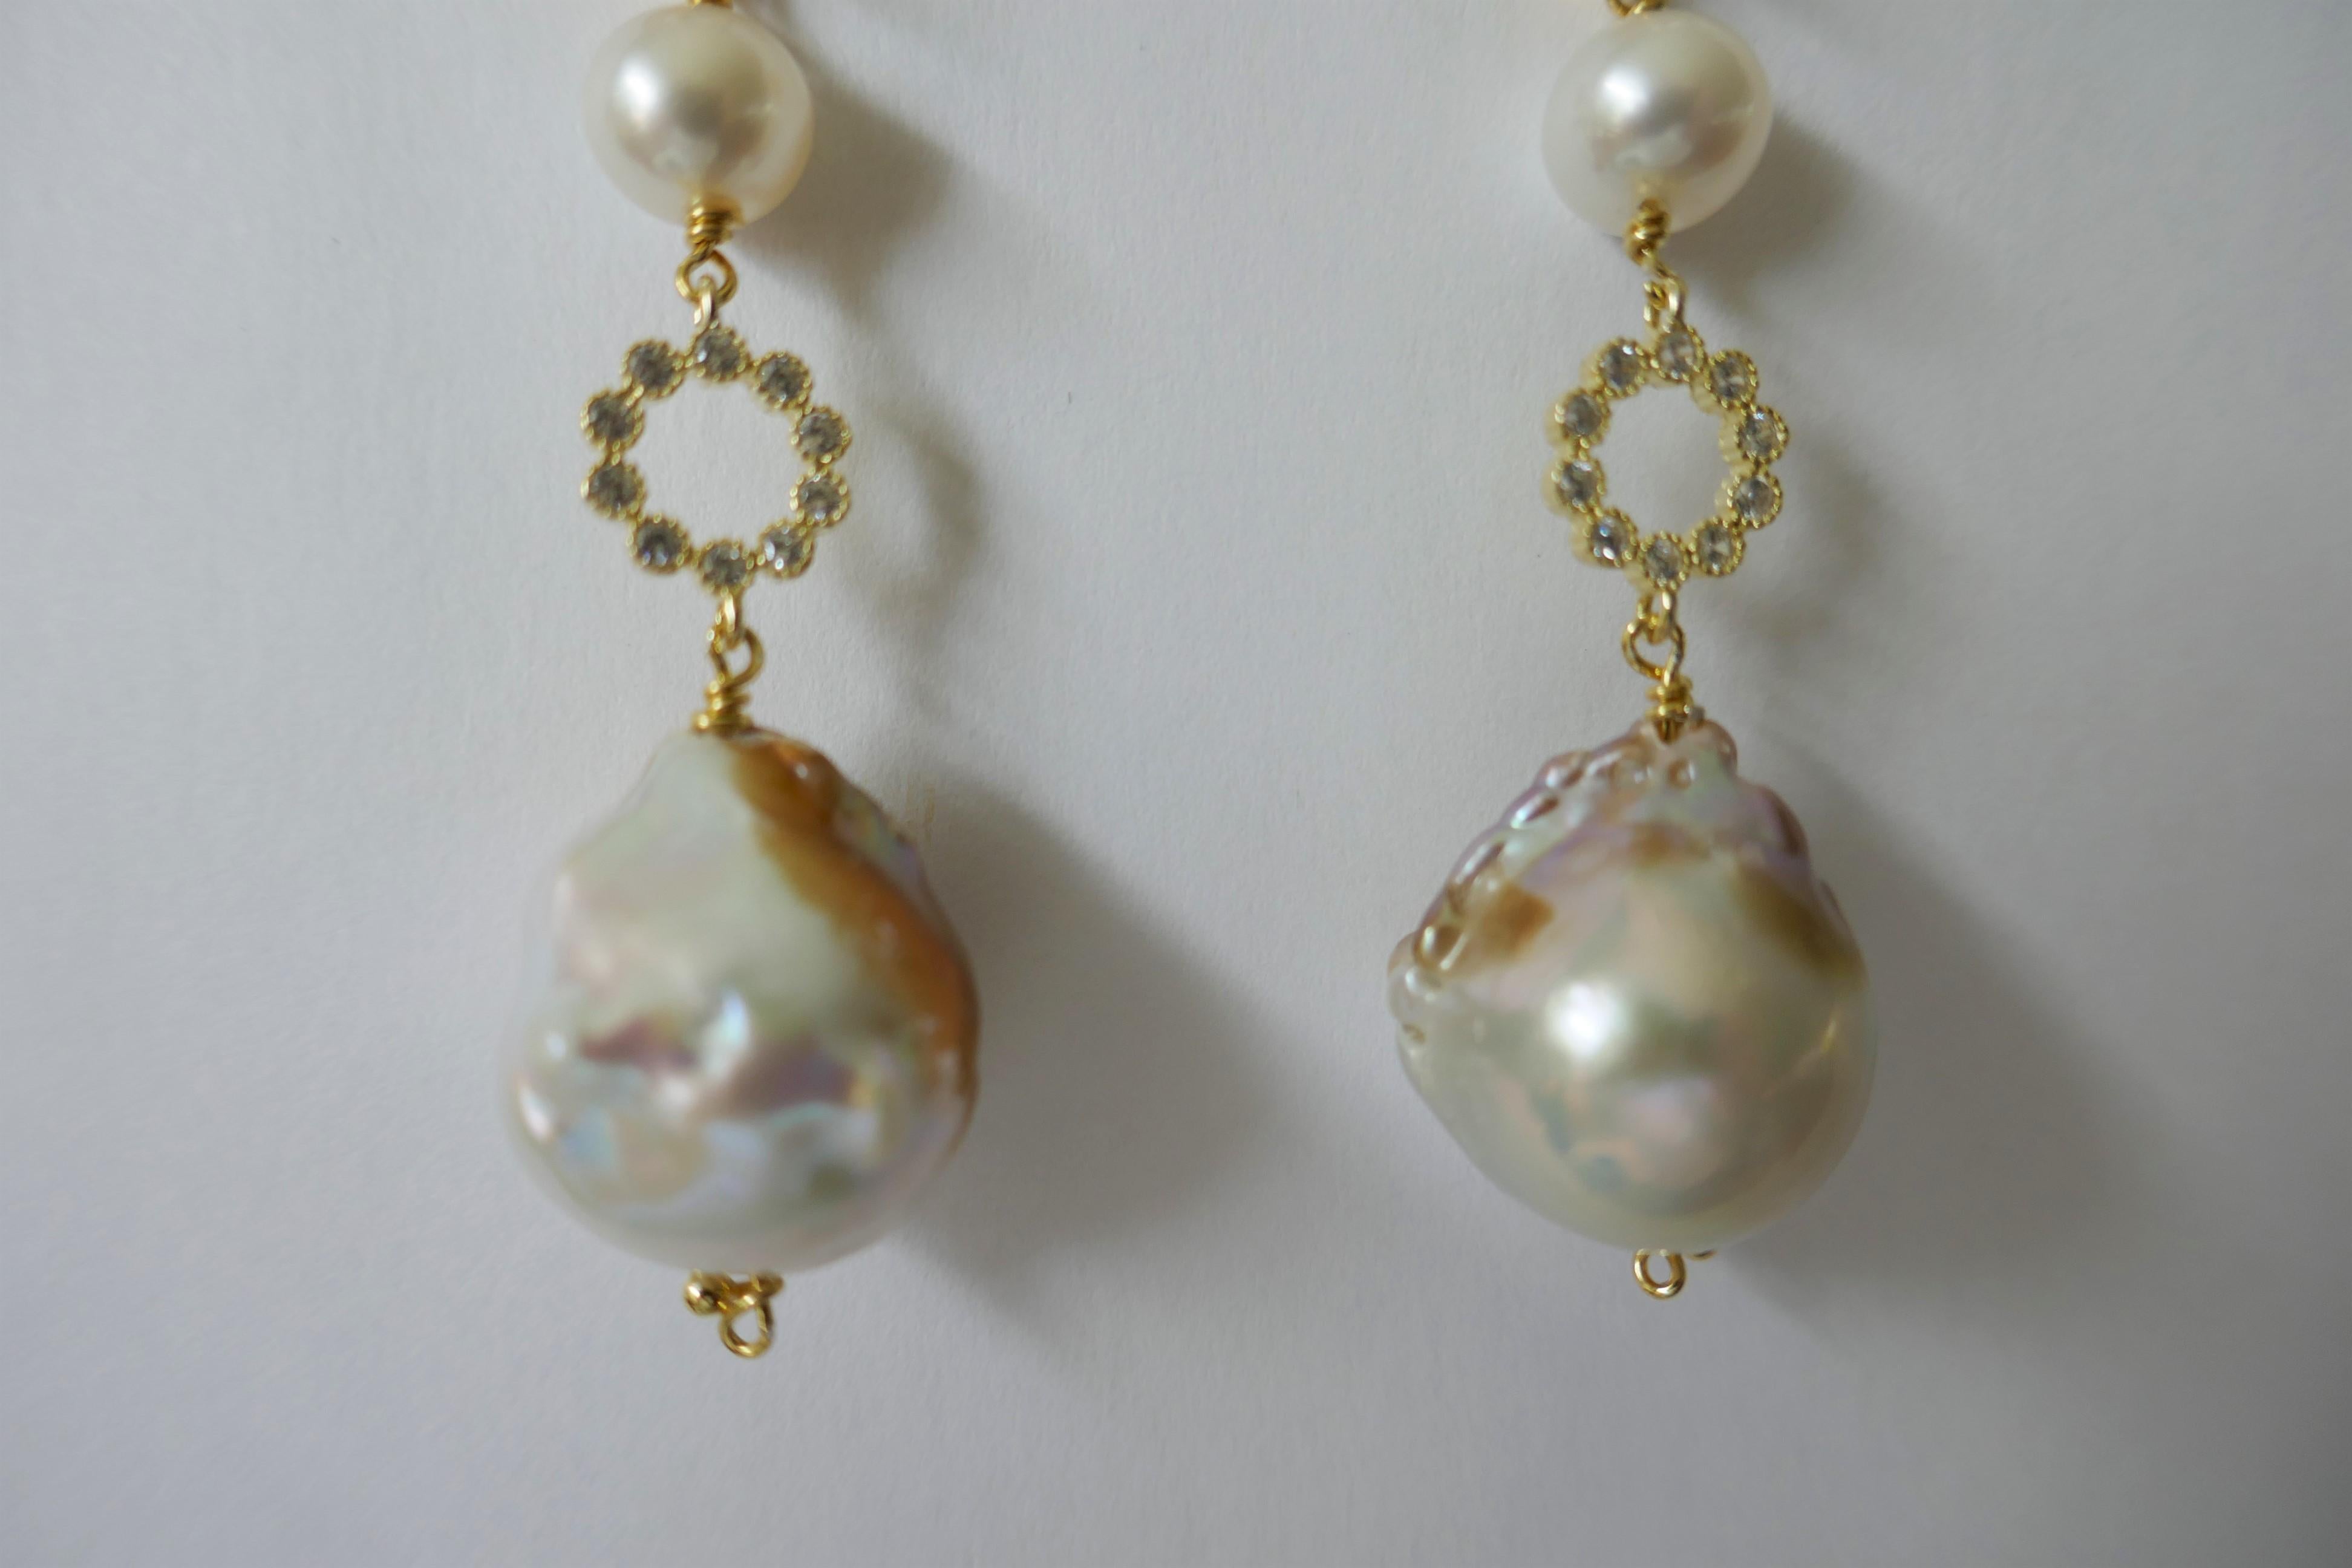 The earrings have a 10x10mm white topaz on 14k plated 925 silver, an 8mm white cultured pearl,  a 9mm cubic zirconia bead and  14mm baroque cultured pearls. These earrings can be dressed up or down.  The large backs are gold filled.  The earrings